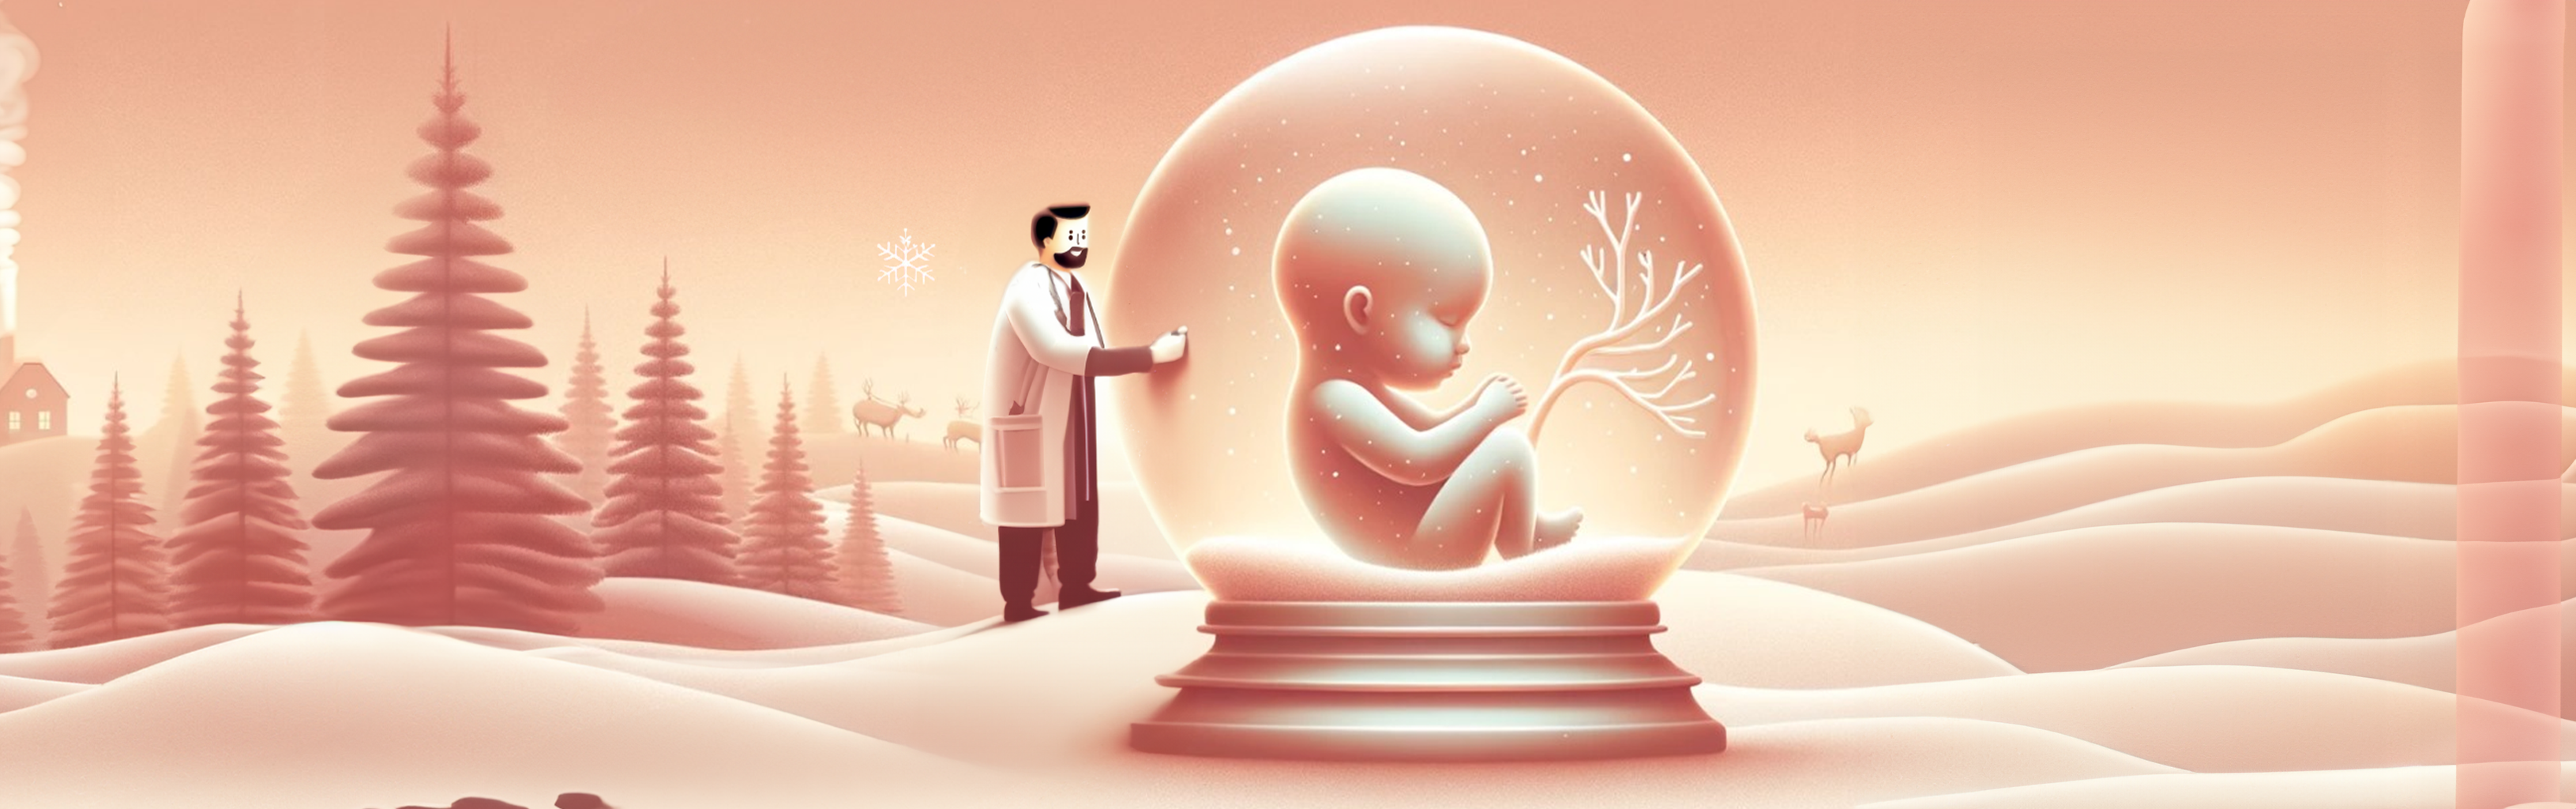 An illustration for a blog post about a London Pregnancy Clinic event, depicting a serene winter scene with a doctor holding a snowflake wand beside a giant, glowing snow globe. Inside the globe, a peaceful foetus is curled up, akin to a budding flower on a tree branch, symbolising the clinic's nurturing approach to prenatal care.